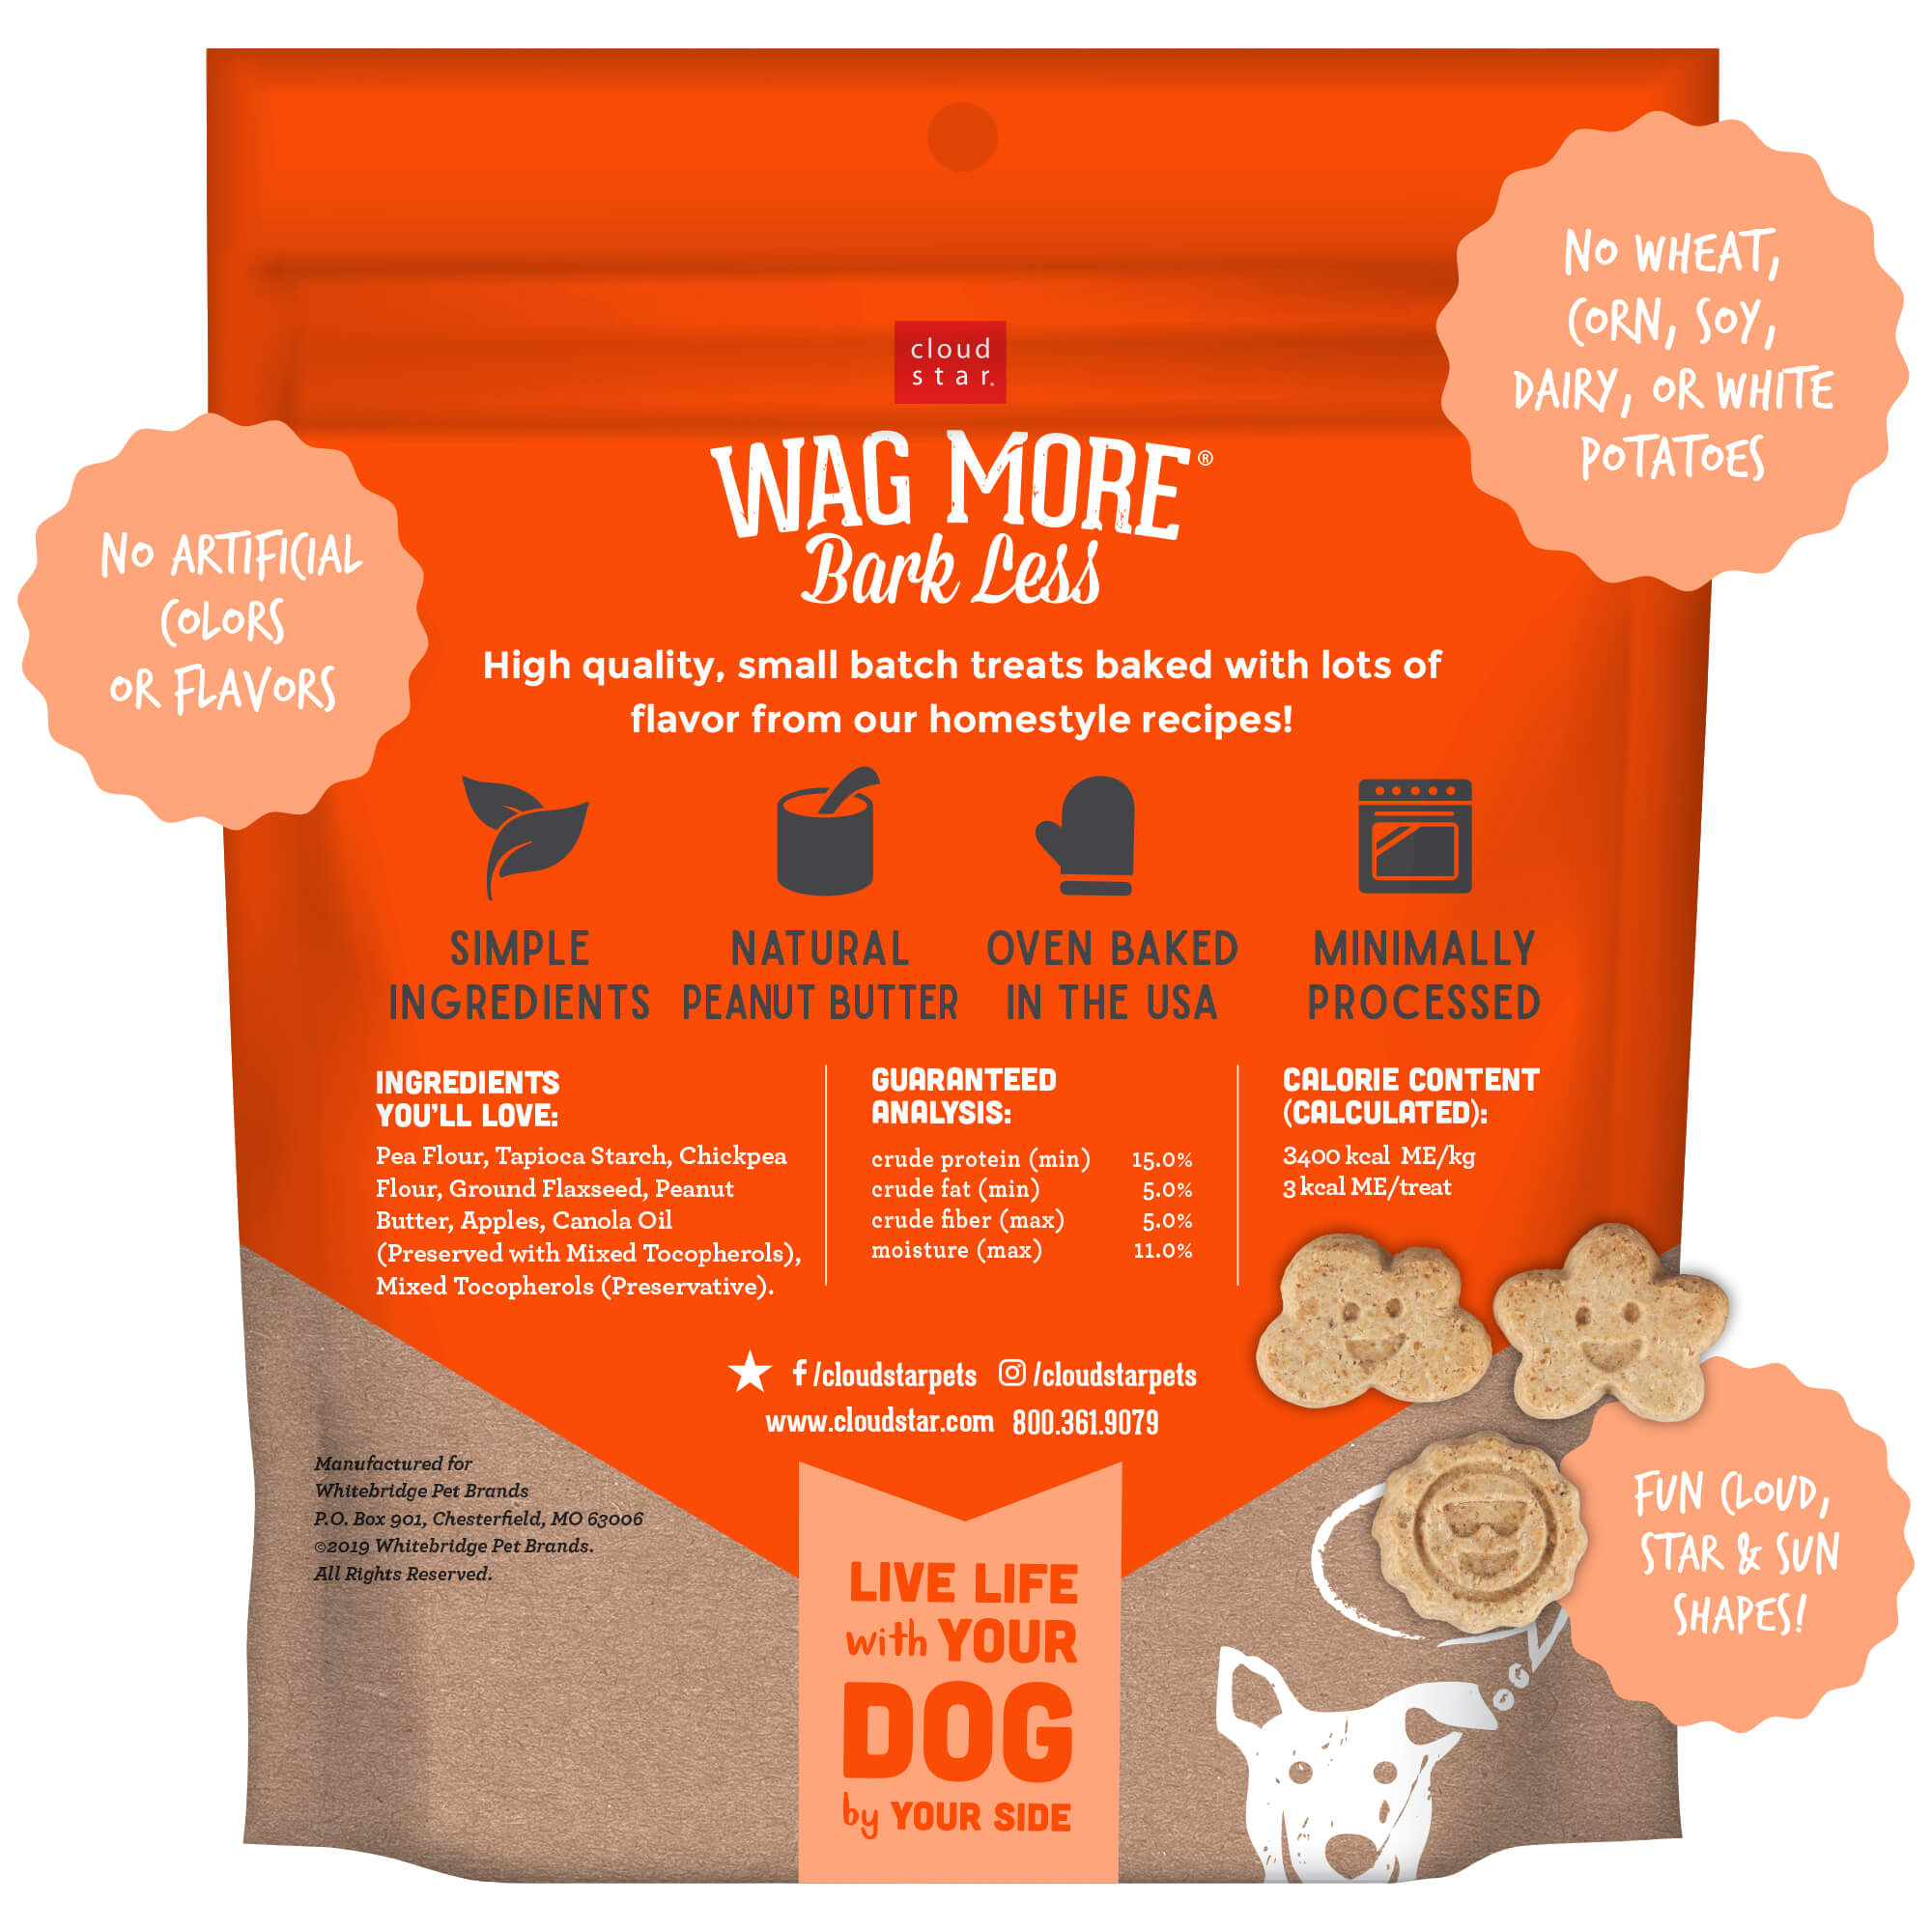 Cloud Star Wag More Bark Less Mini Biscuits Grain Free Oven Baked Dog Treats with Peanut Butter & Apples, 7oz